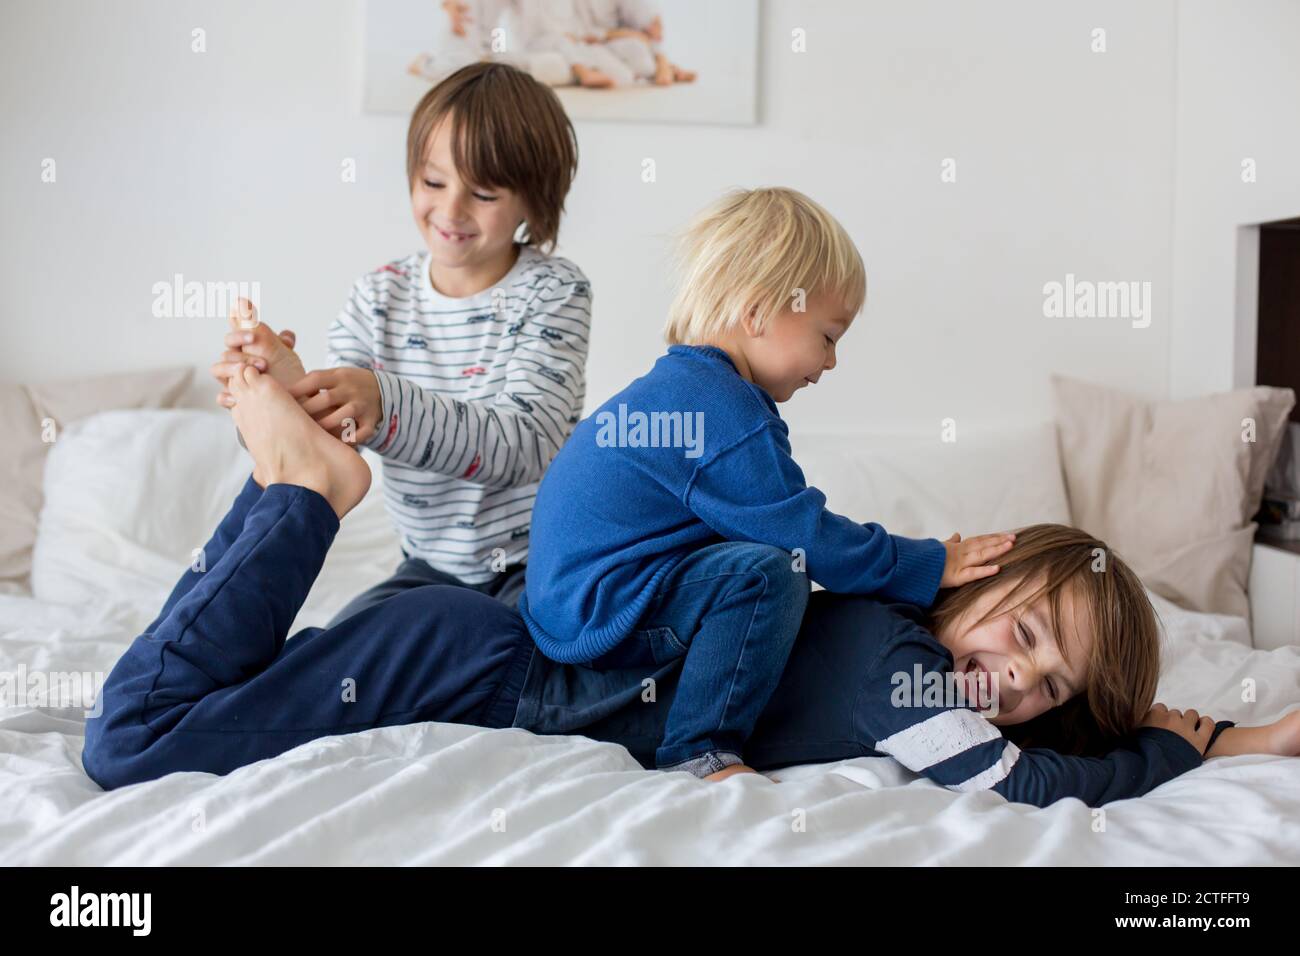 Children, brothers, playing at home, tickling feet laughing and smiling Stock Photo